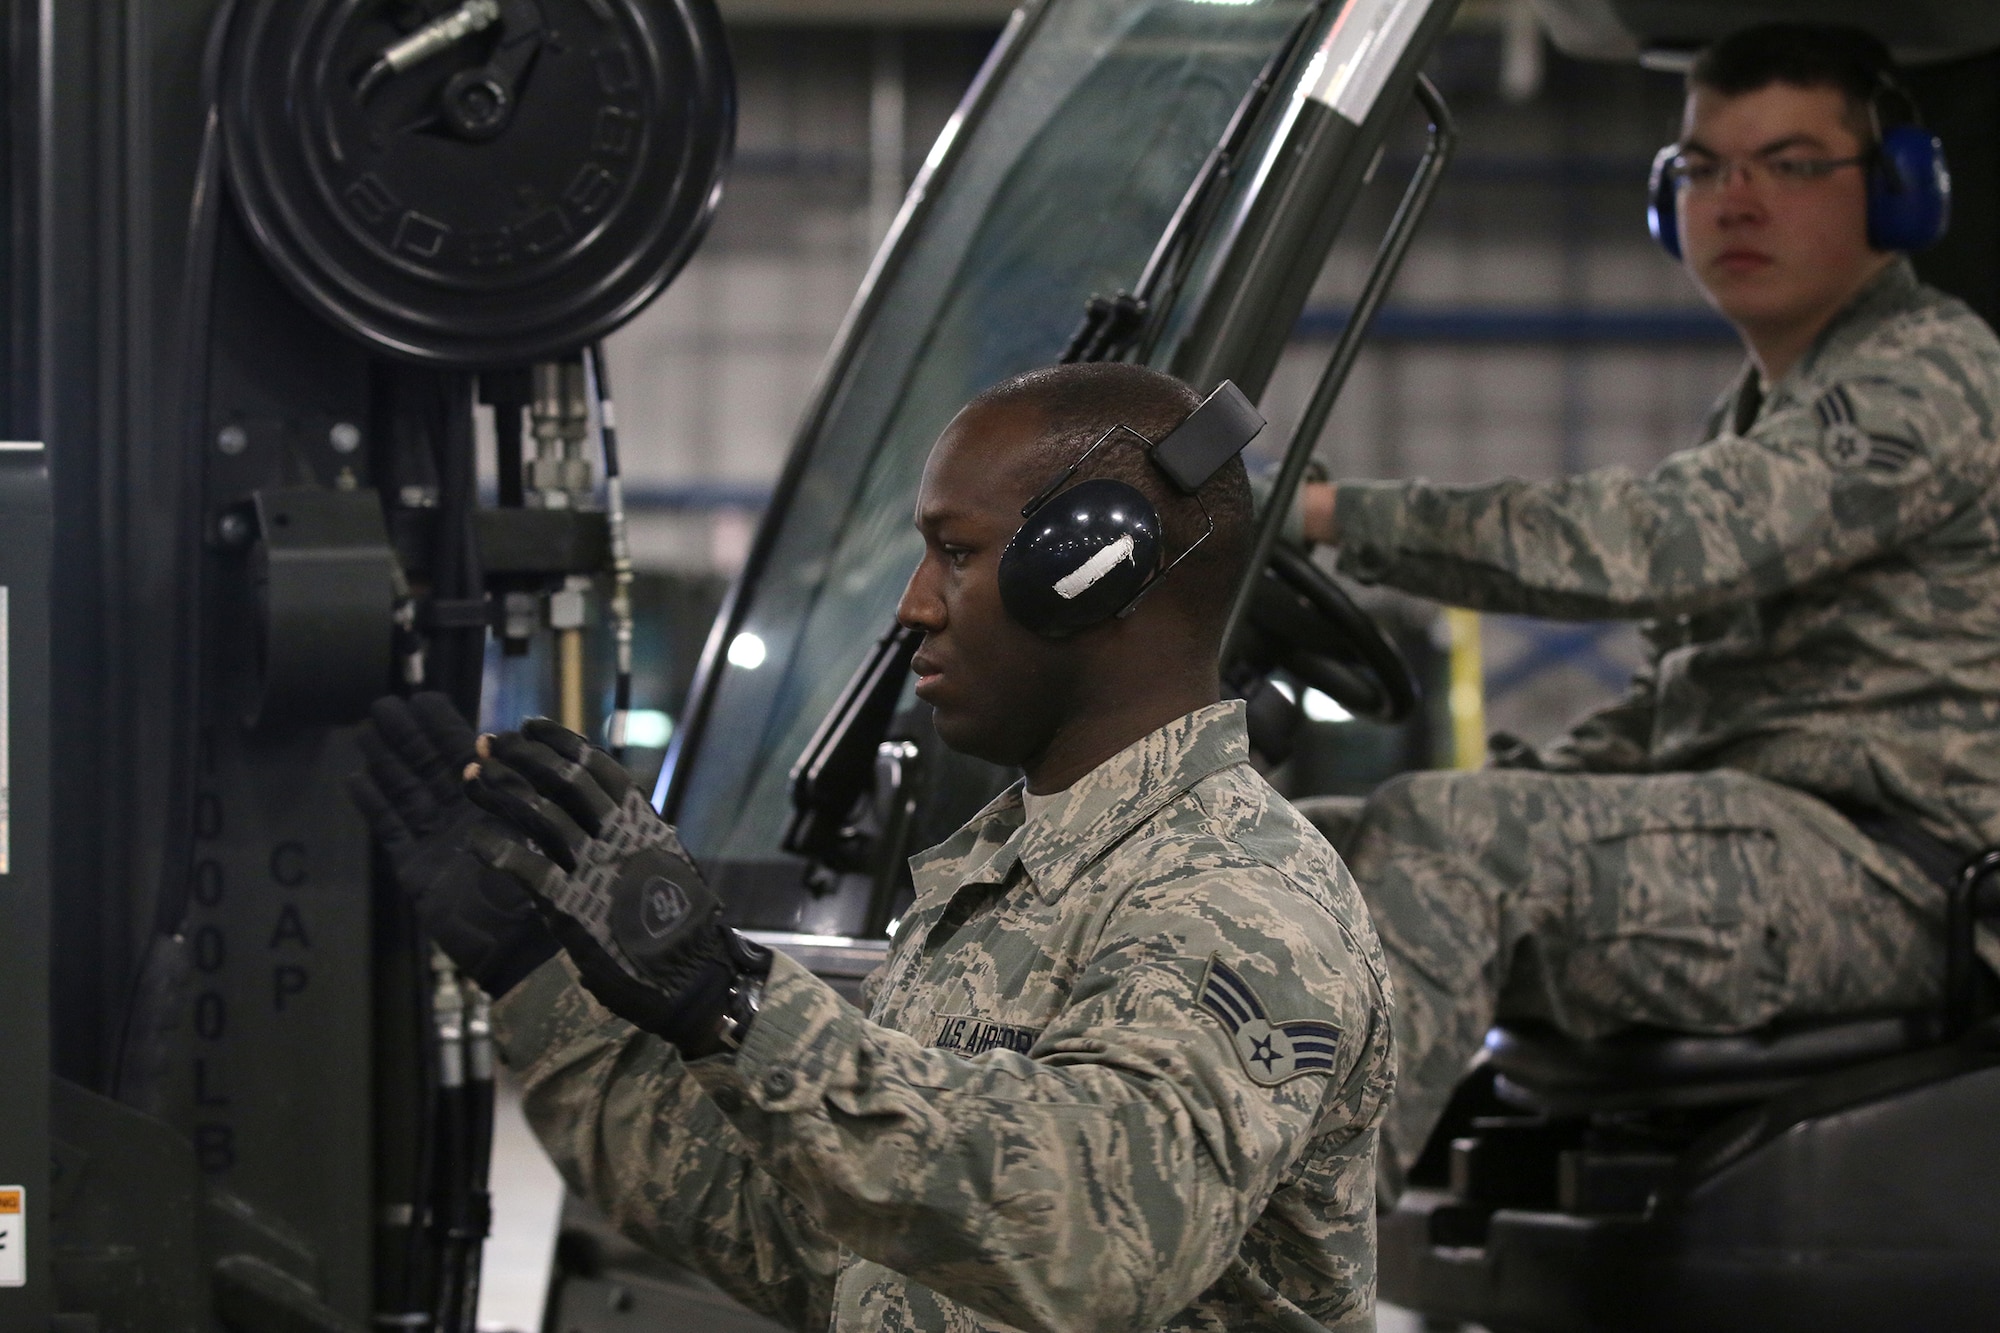 WRIGHT-PATTERSON AIR FORCE BASE, Ohio – Senior Airman Nicholas Giannuzzi, 87th Aerial Port Squadron cargo processor, drives the forklift while Senior Airman Dylan Lewis-Lee, 87th Aerial Port Squadron cargo processor, guides him during a cargo build-up portion of forklift training held during the Nov. 6, 2015 unit training assembly. (U.S. Air Force photo /Tech. Sgt. Patrick O’Reilly)